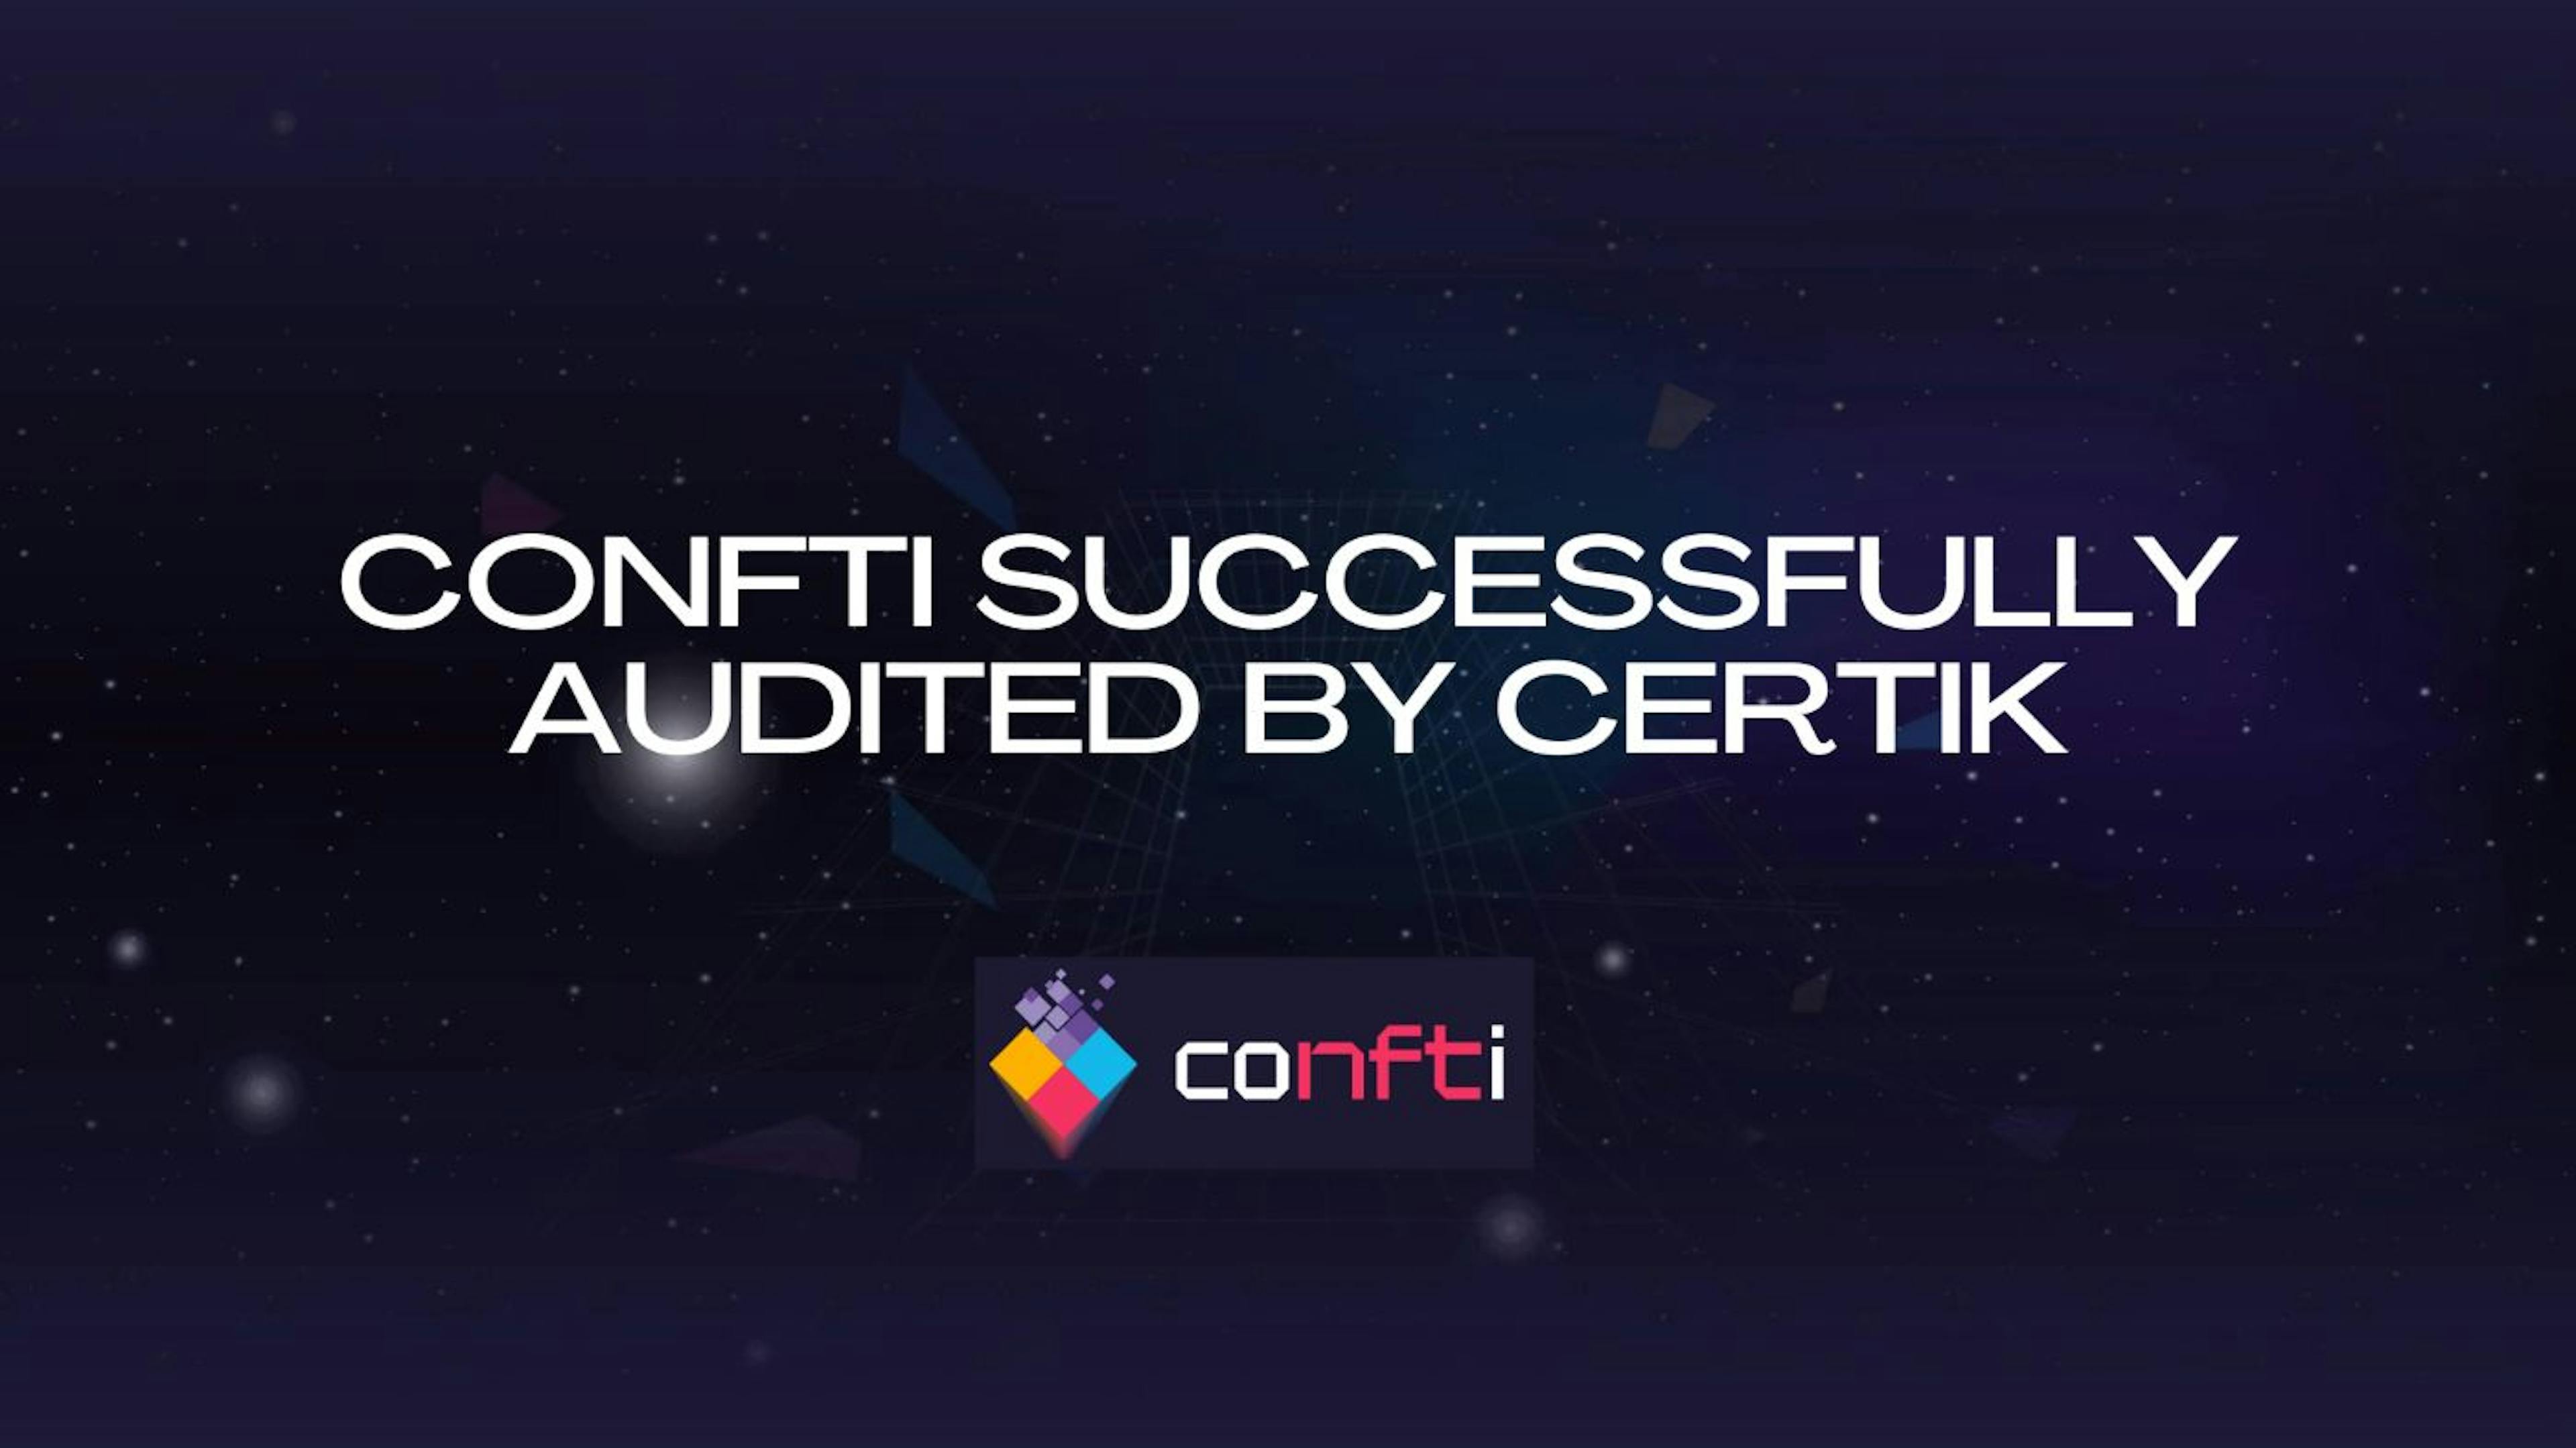 featured image - Successfully Audited By CertiK, Confti is Now Officially Open Source